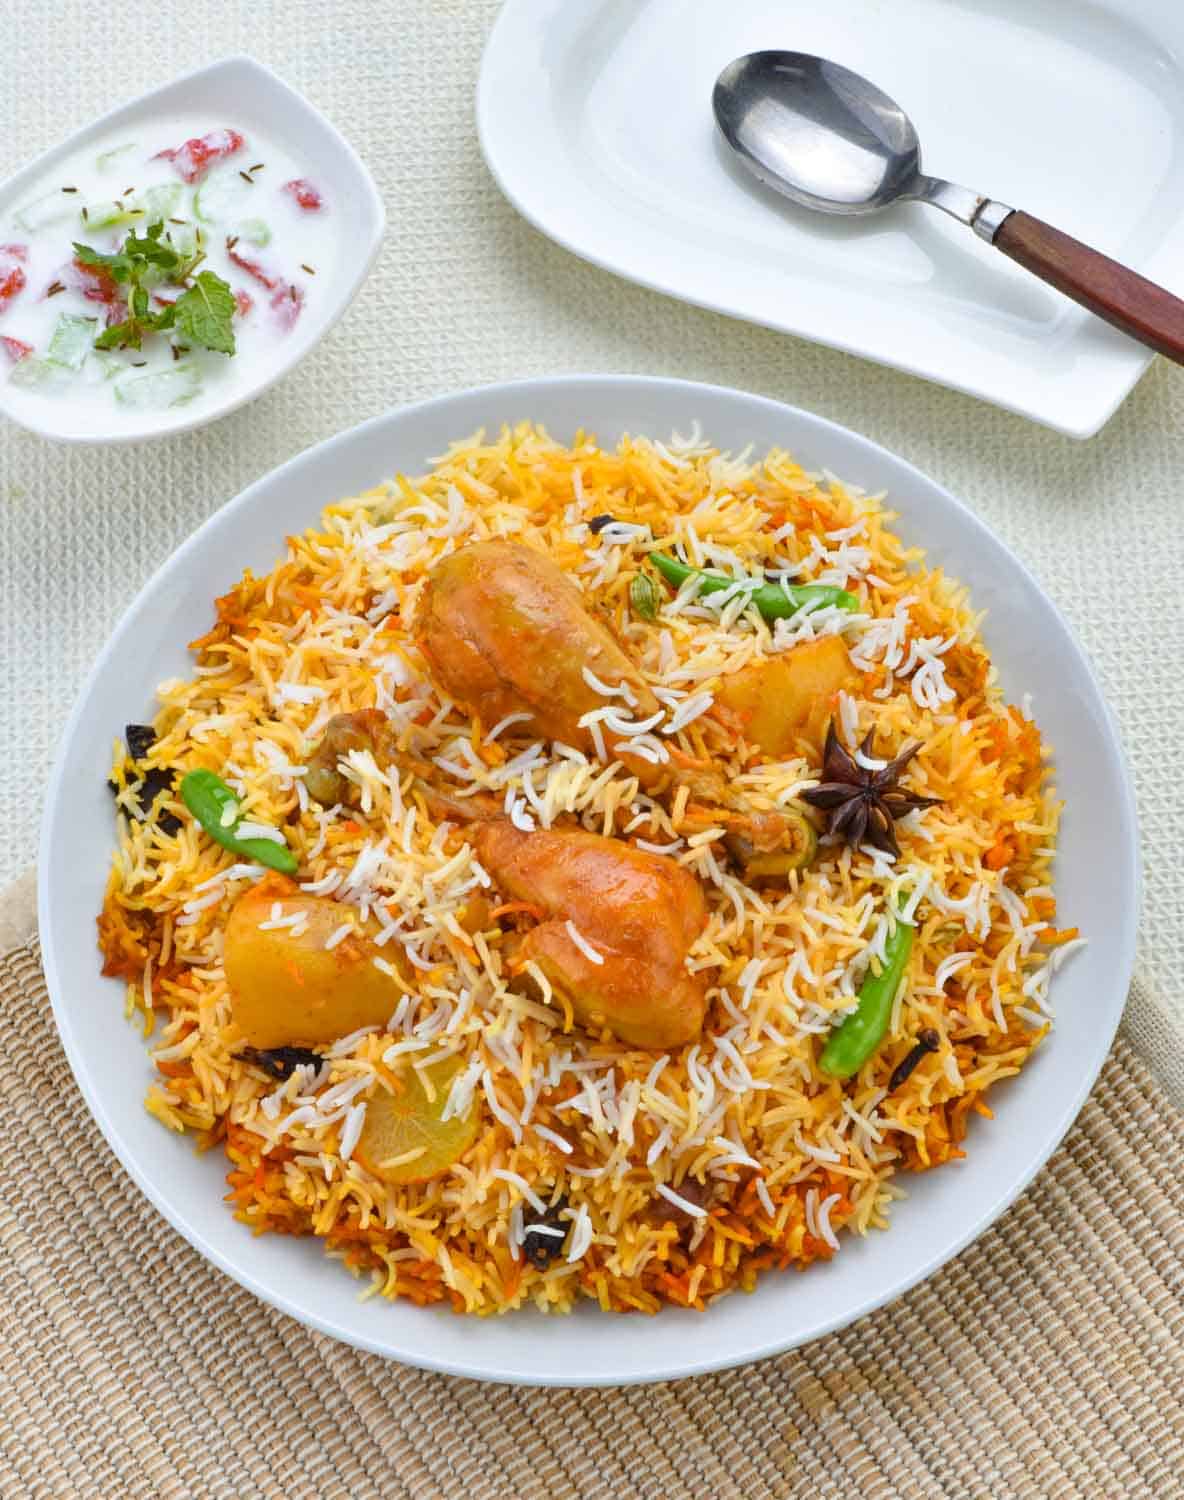 Chicken Biryani. A deliciously colorful rice dish filled with spicy marinated chicken along with salad & raita.